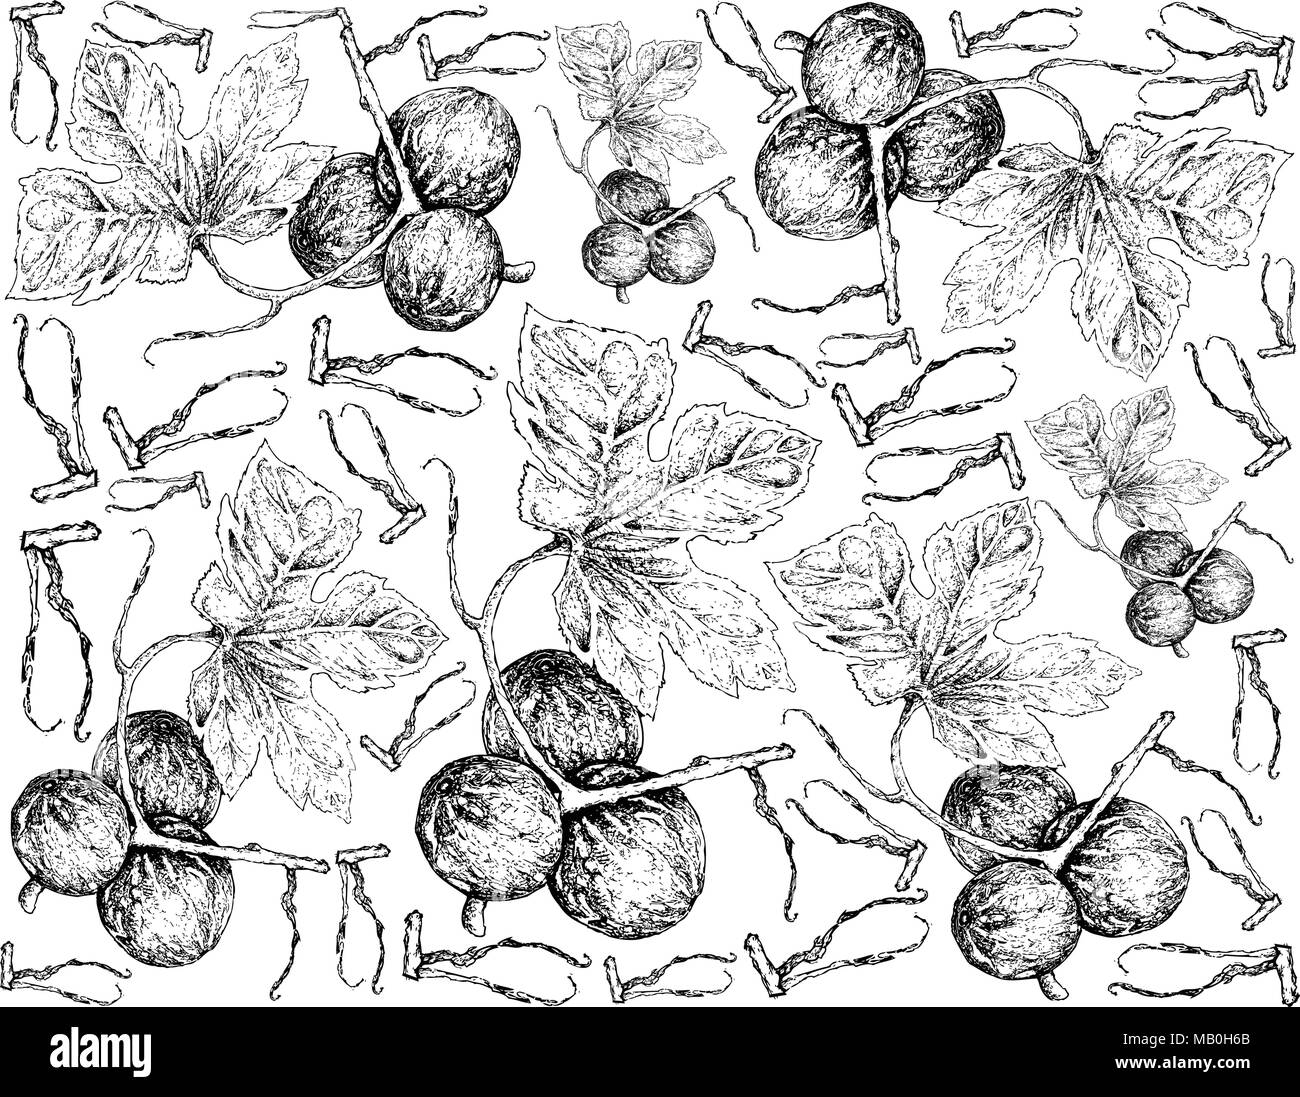 Vegetable and Fruit, Illustration Wallpaper Background of Hand Drawn Sketch of Native Bryony, Striped Cucumber or Diplocyclos Palmatus Fruits. Stock Vector